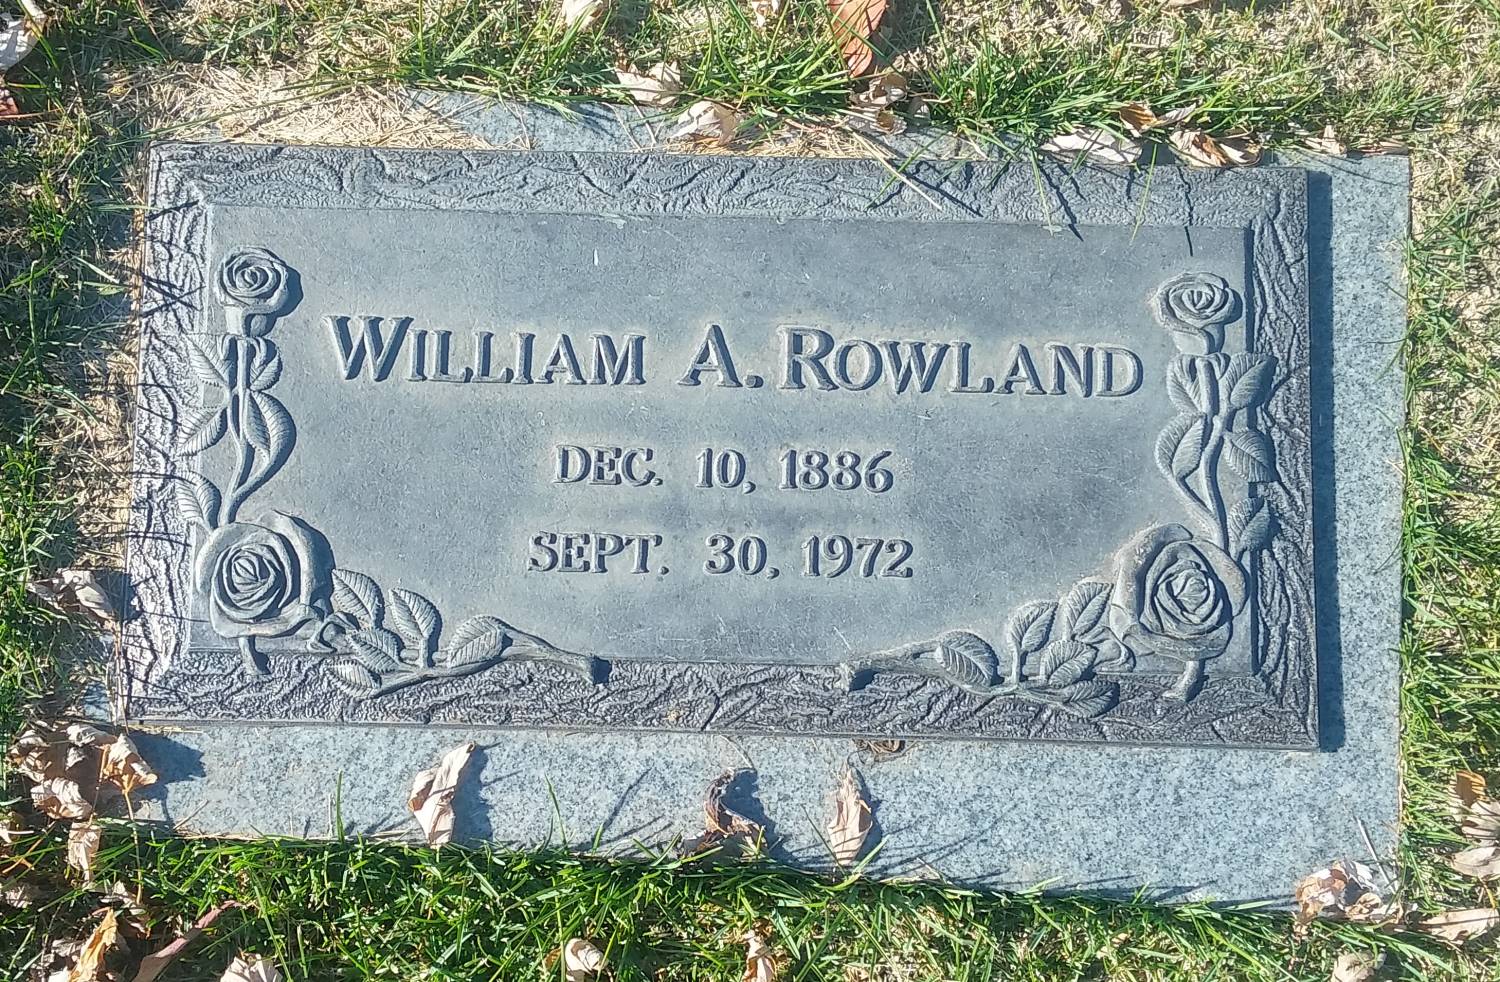 Marker for William A. Rowland